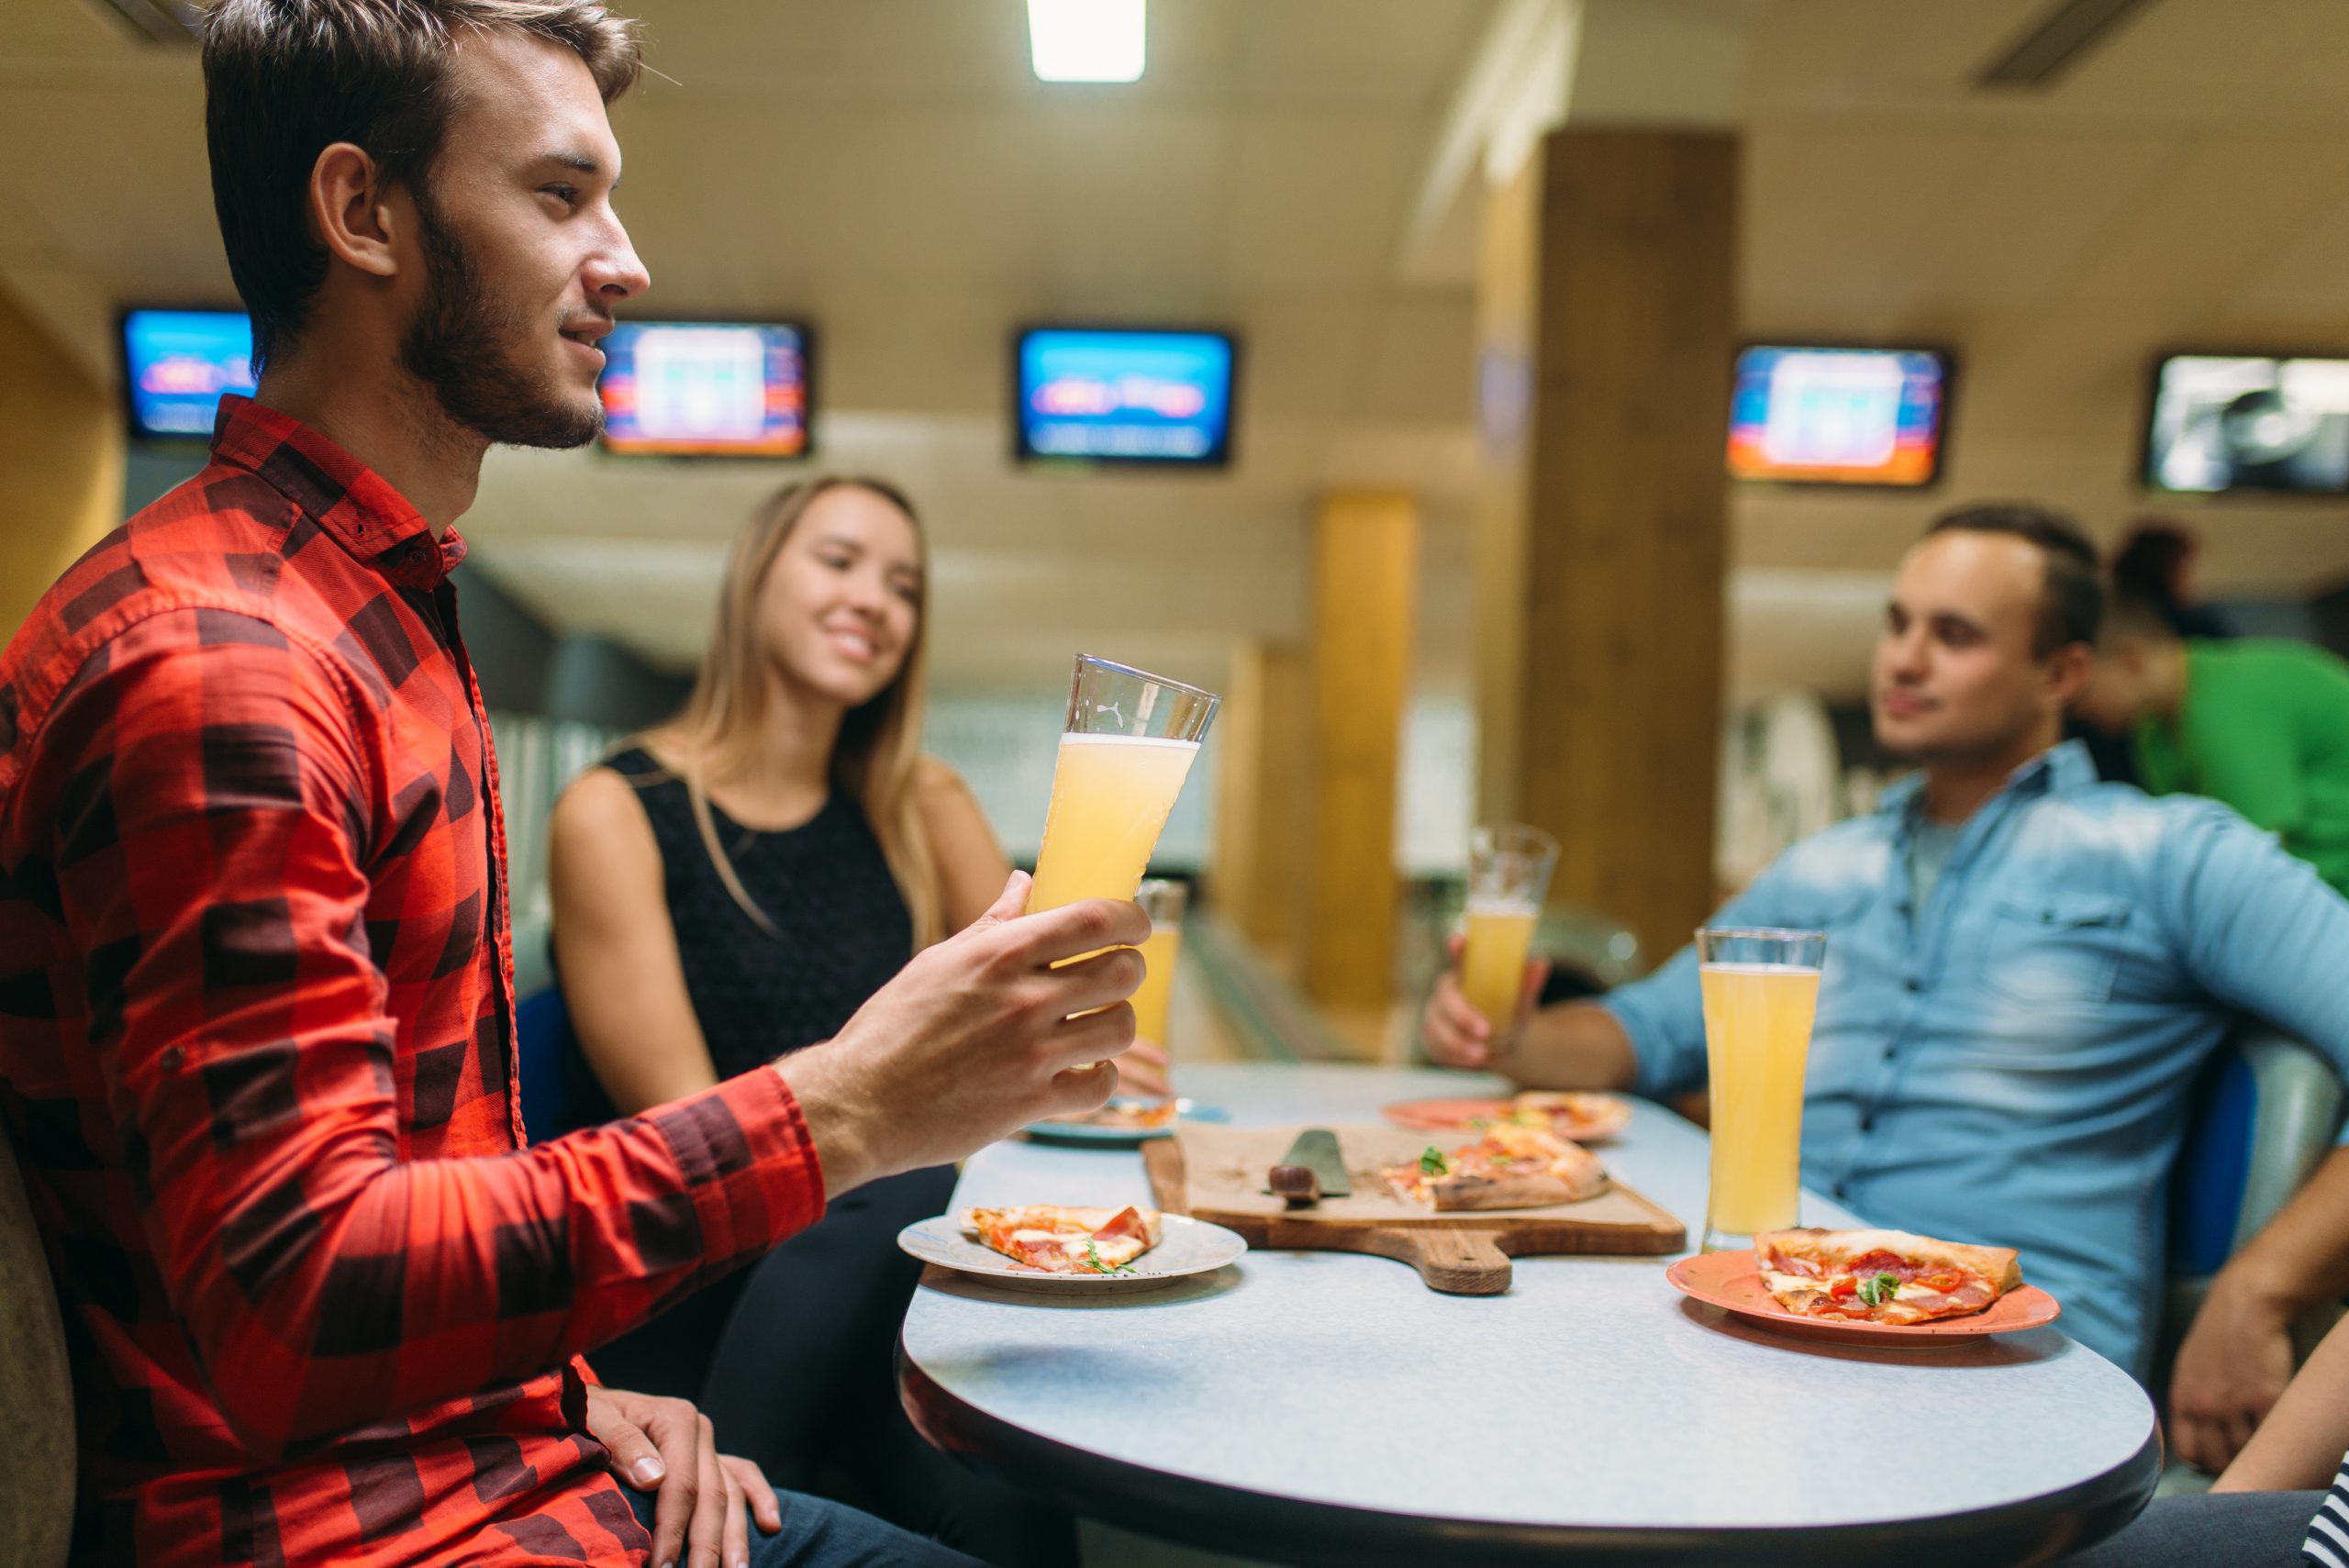 Friends drinks and eats pizza in bowling alley